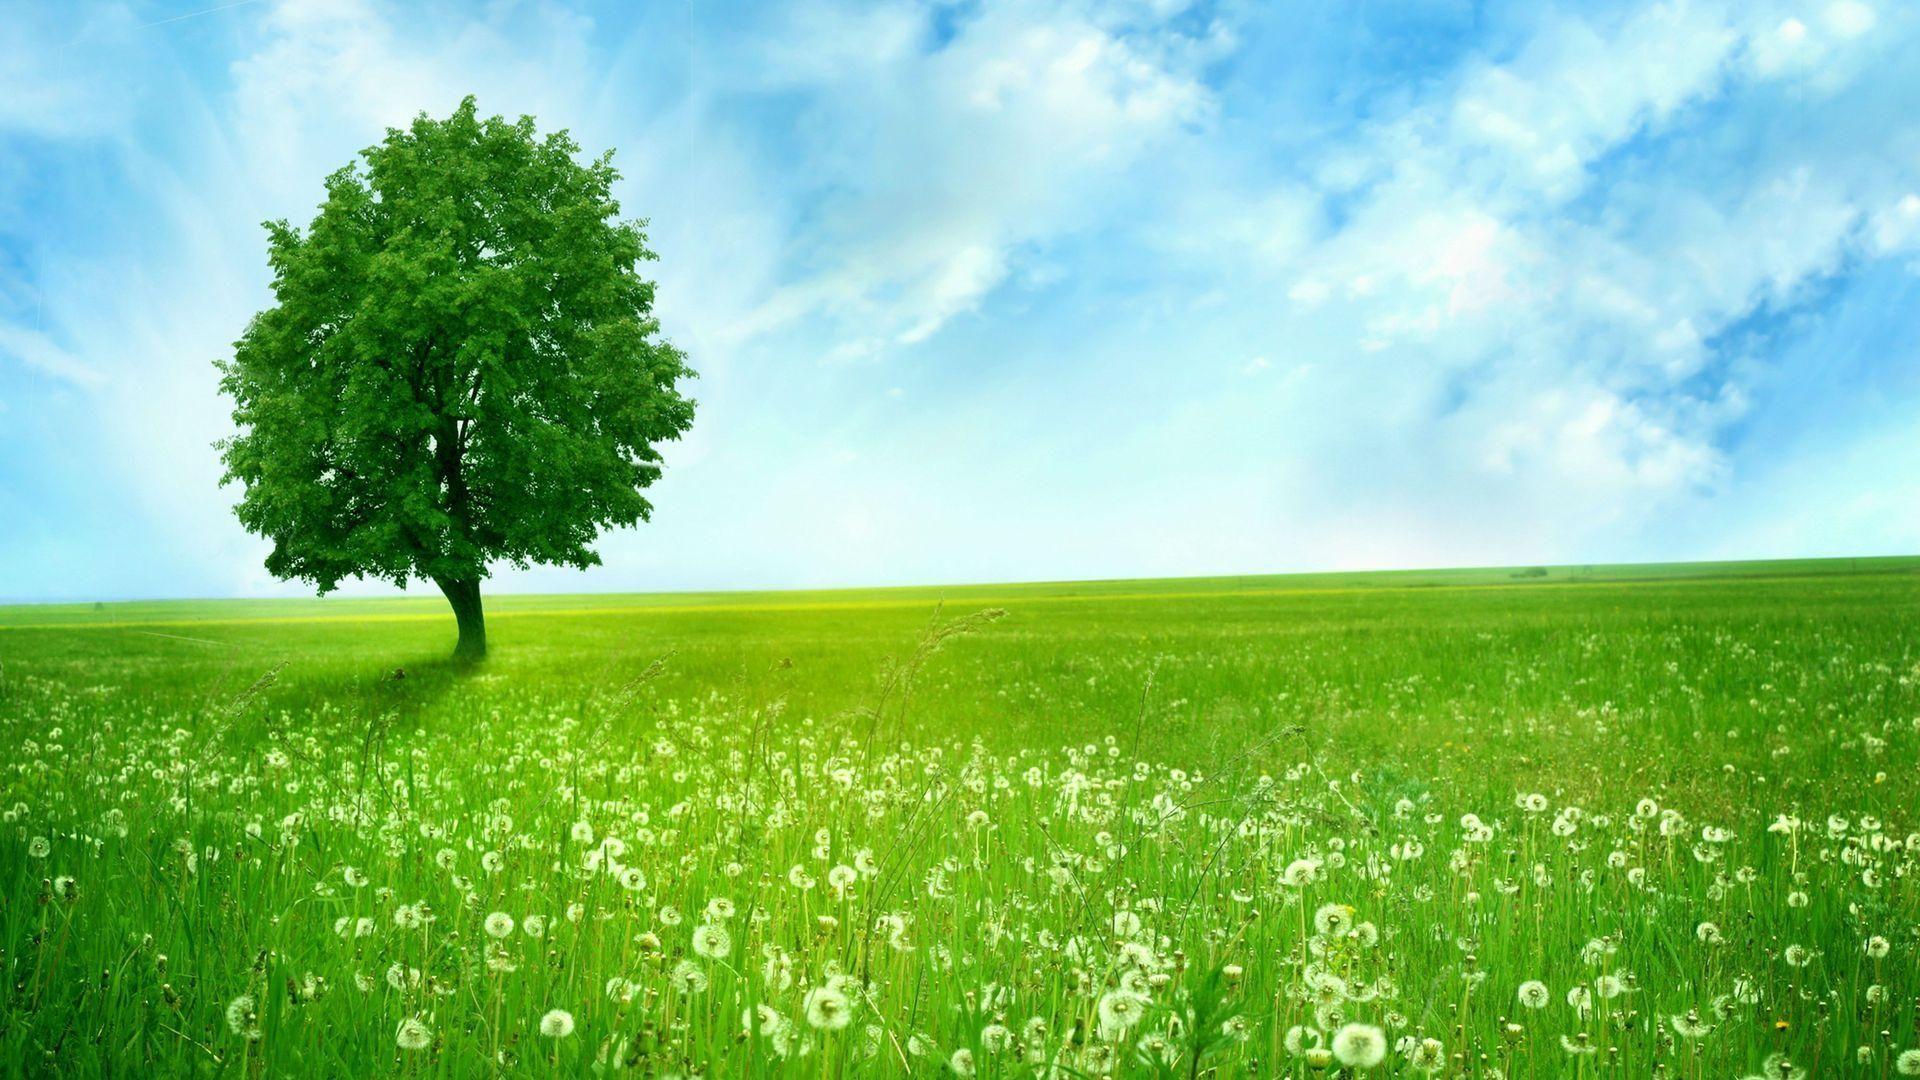 Green Nature Wallpaper, Image, Photo, Picture & Pics #green #n